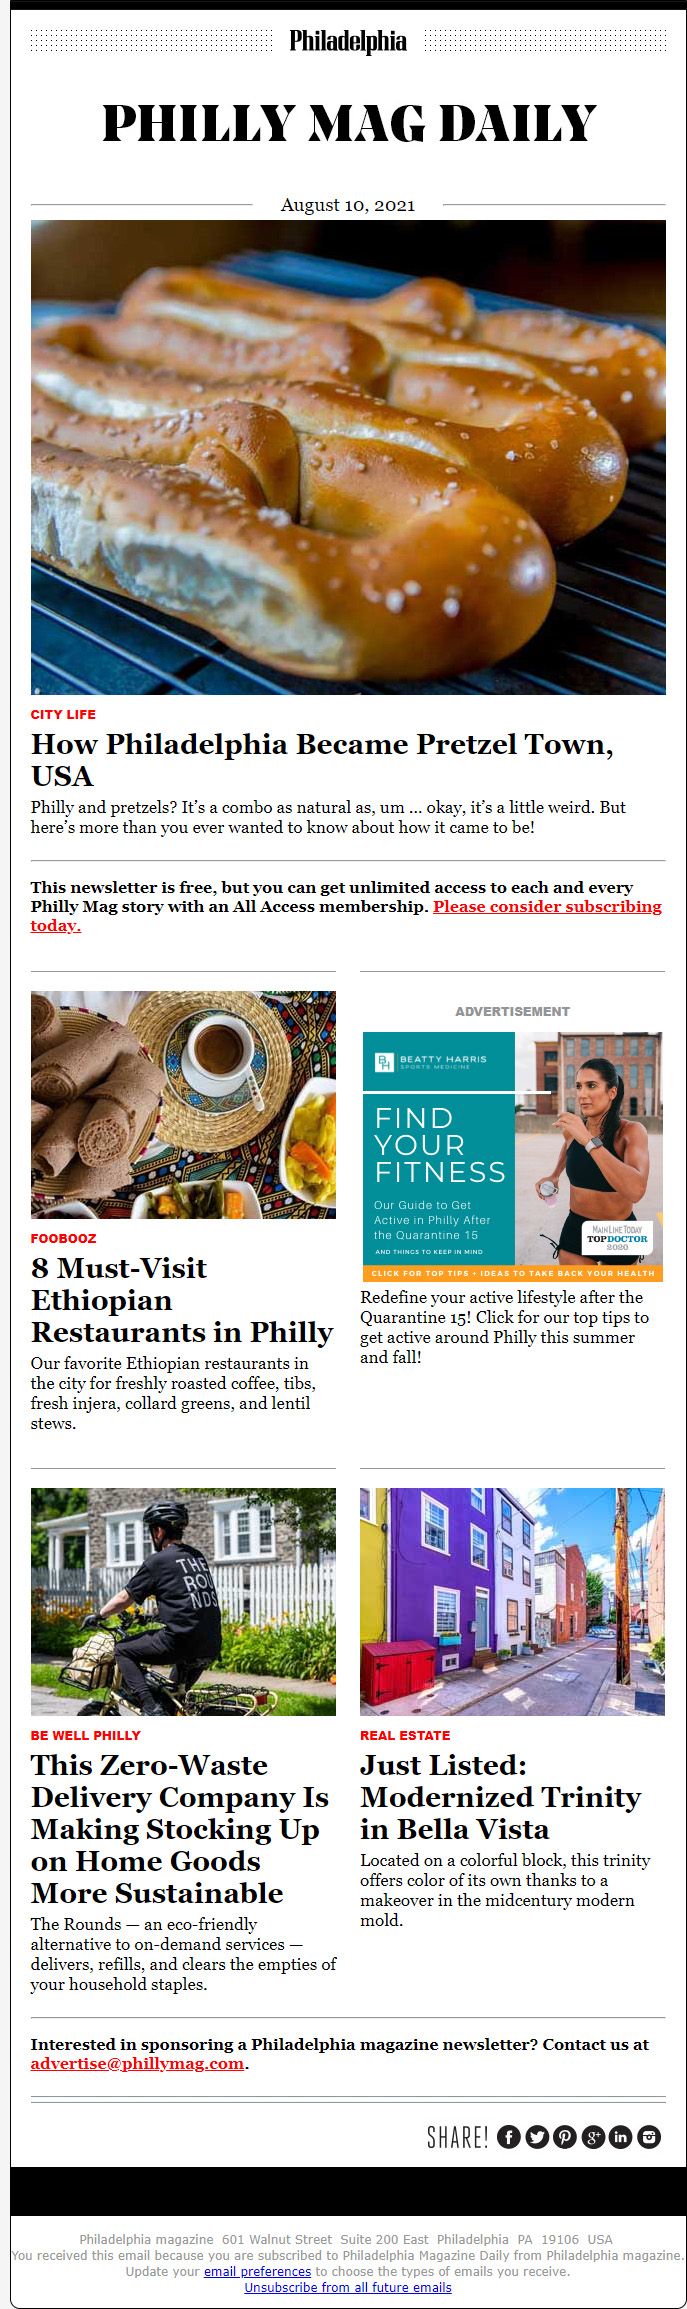 Beatty Harris Ad Placement on Philly Mag